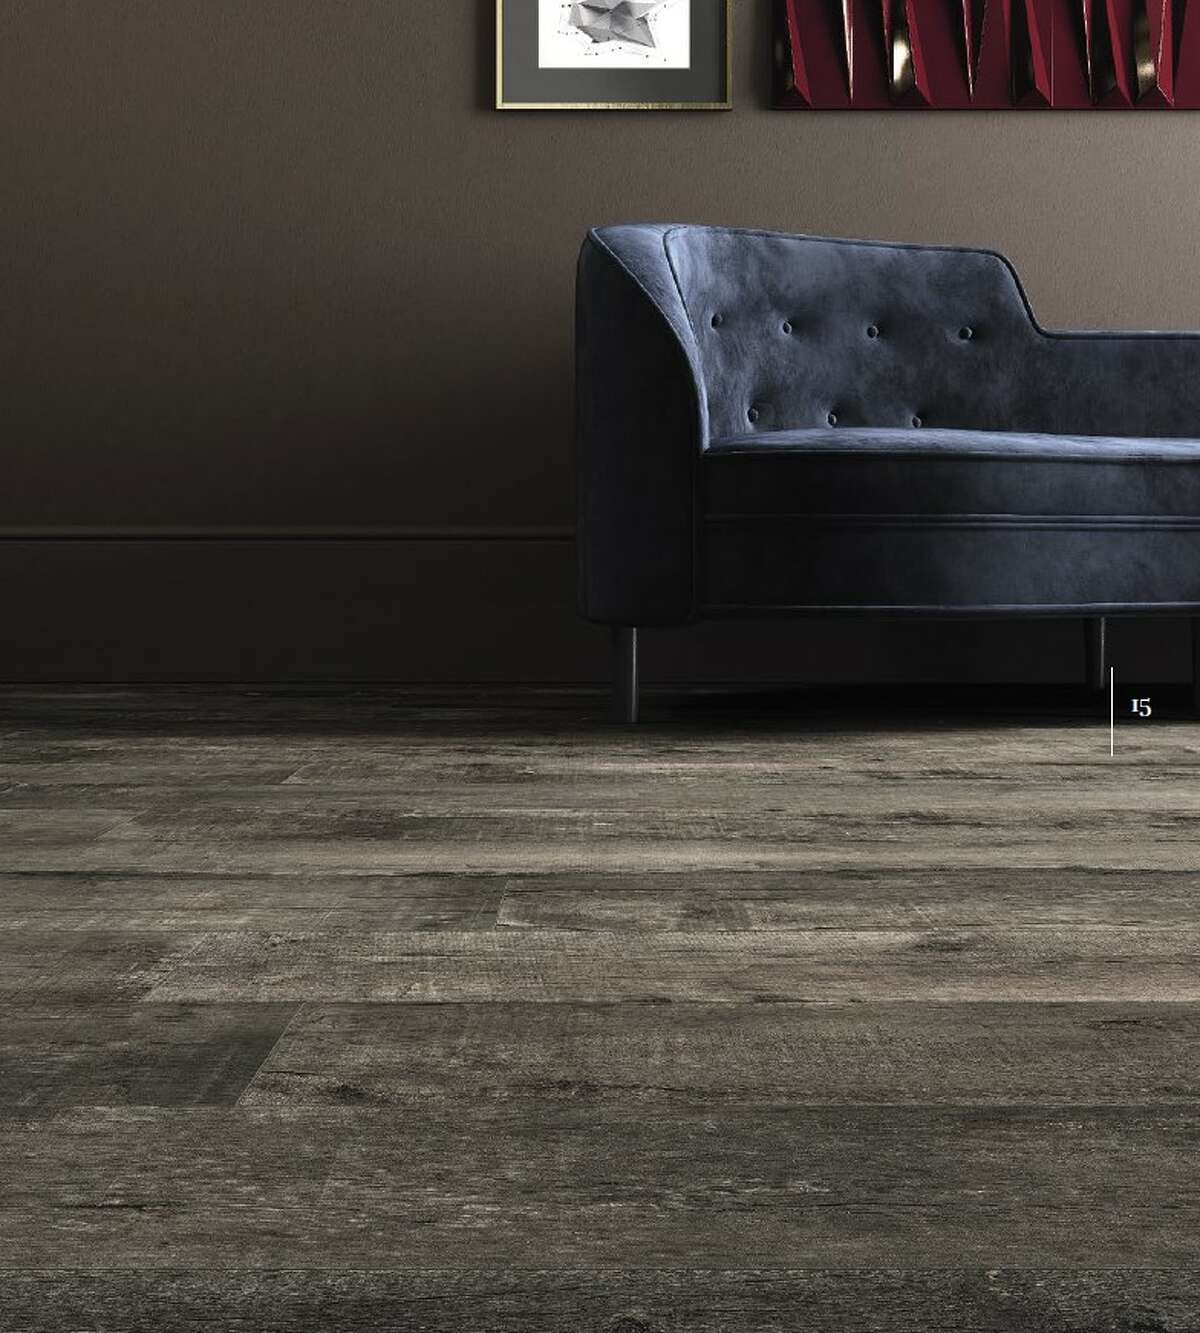 This room shows Imola's Nirvana style porcelain tile that looks like wood.